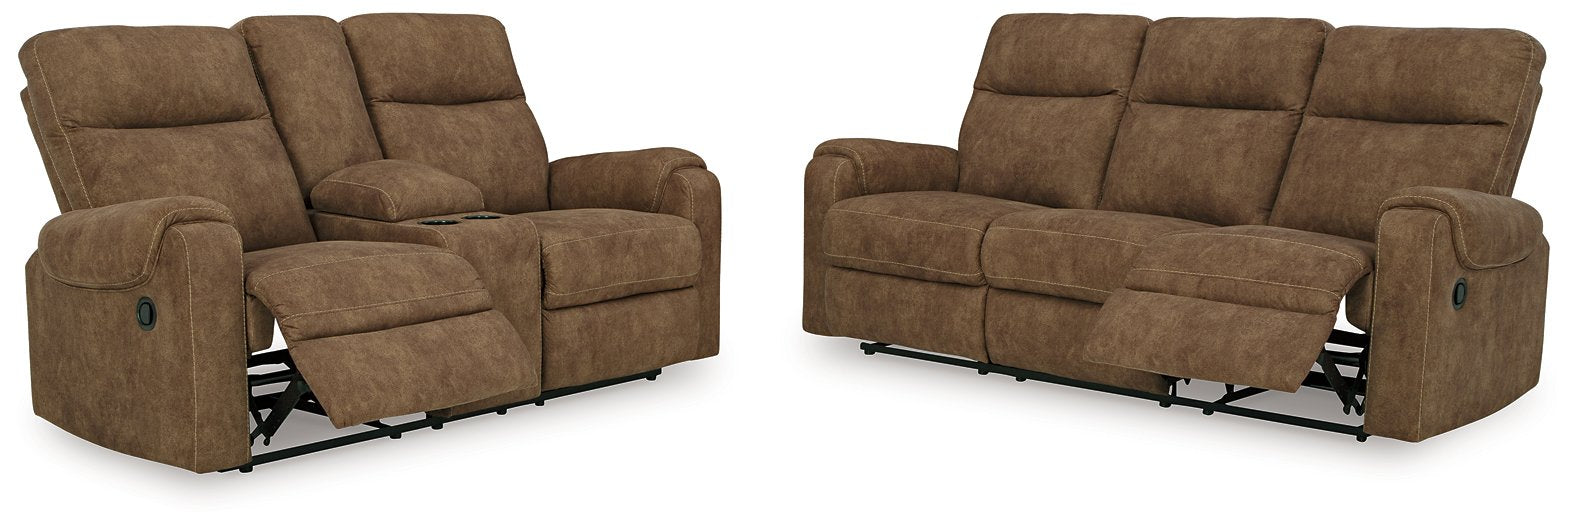 Edenwold Upholstery Package - Half Price Furniture